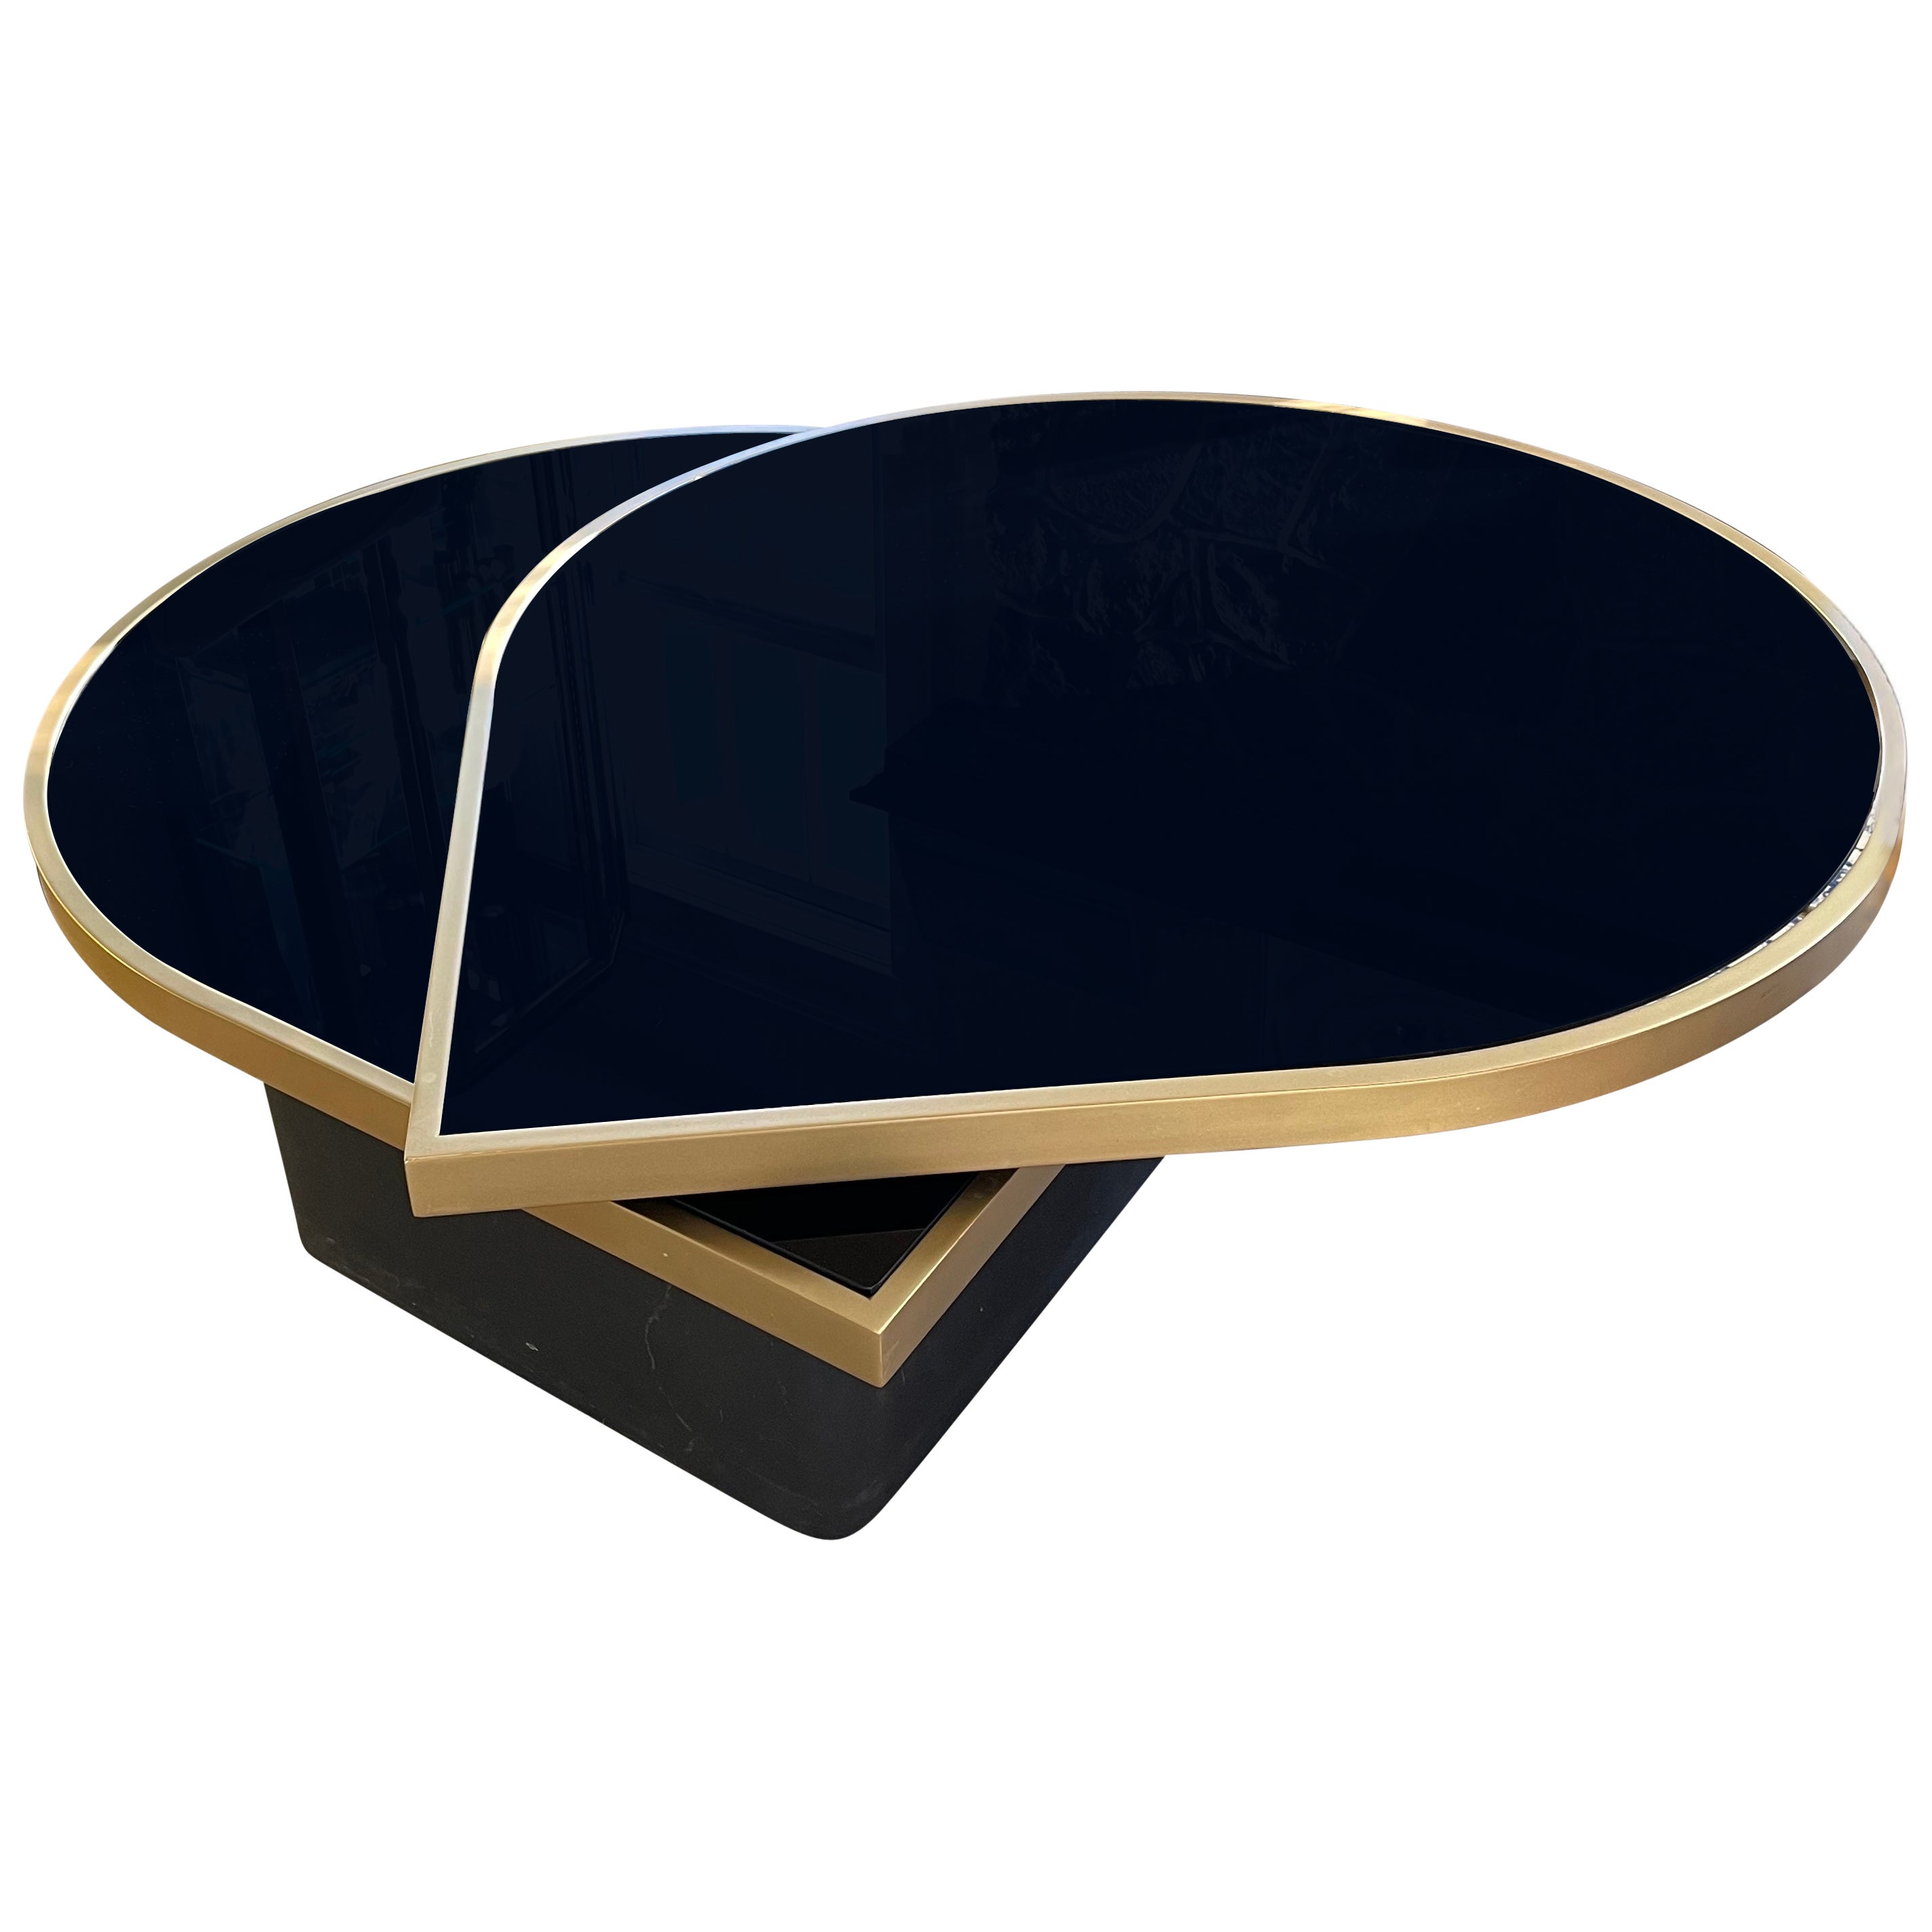 Milo Baughman for  DIA Black Glass and Brass Teardrop Swivel Cocktail Table